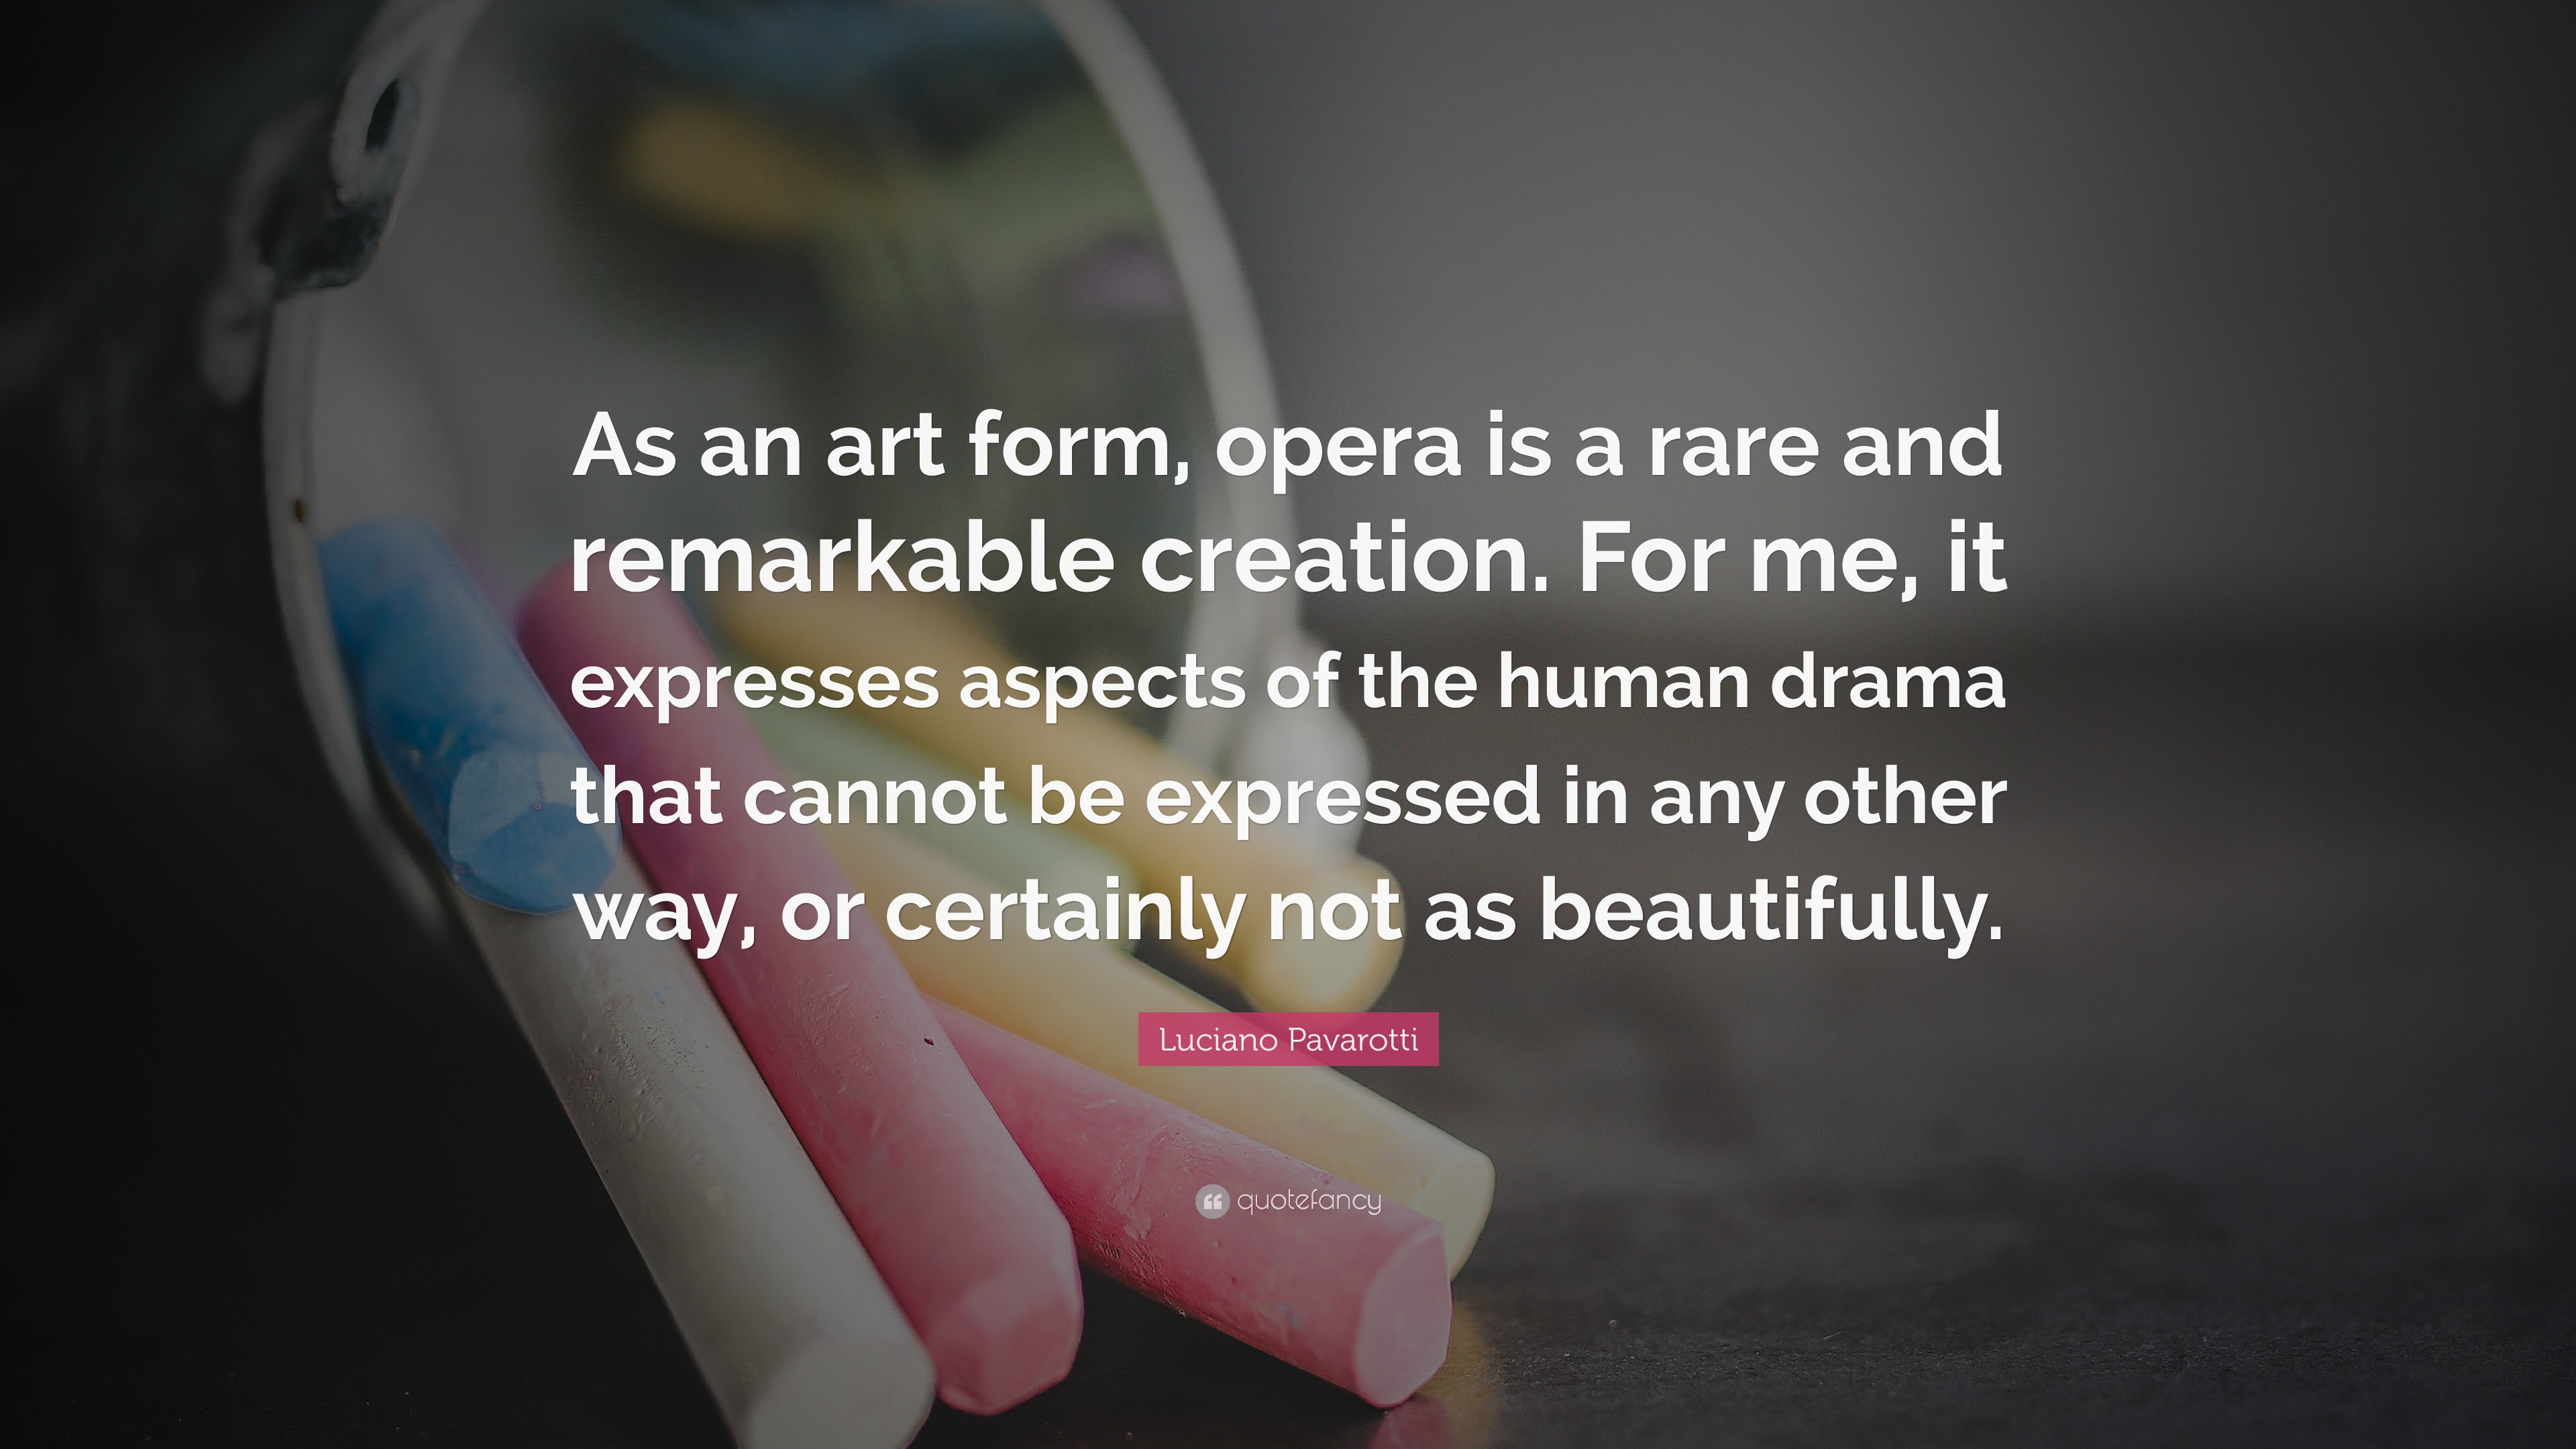 Luciano Pavarotti Quote: “As an art form, opera is a rare